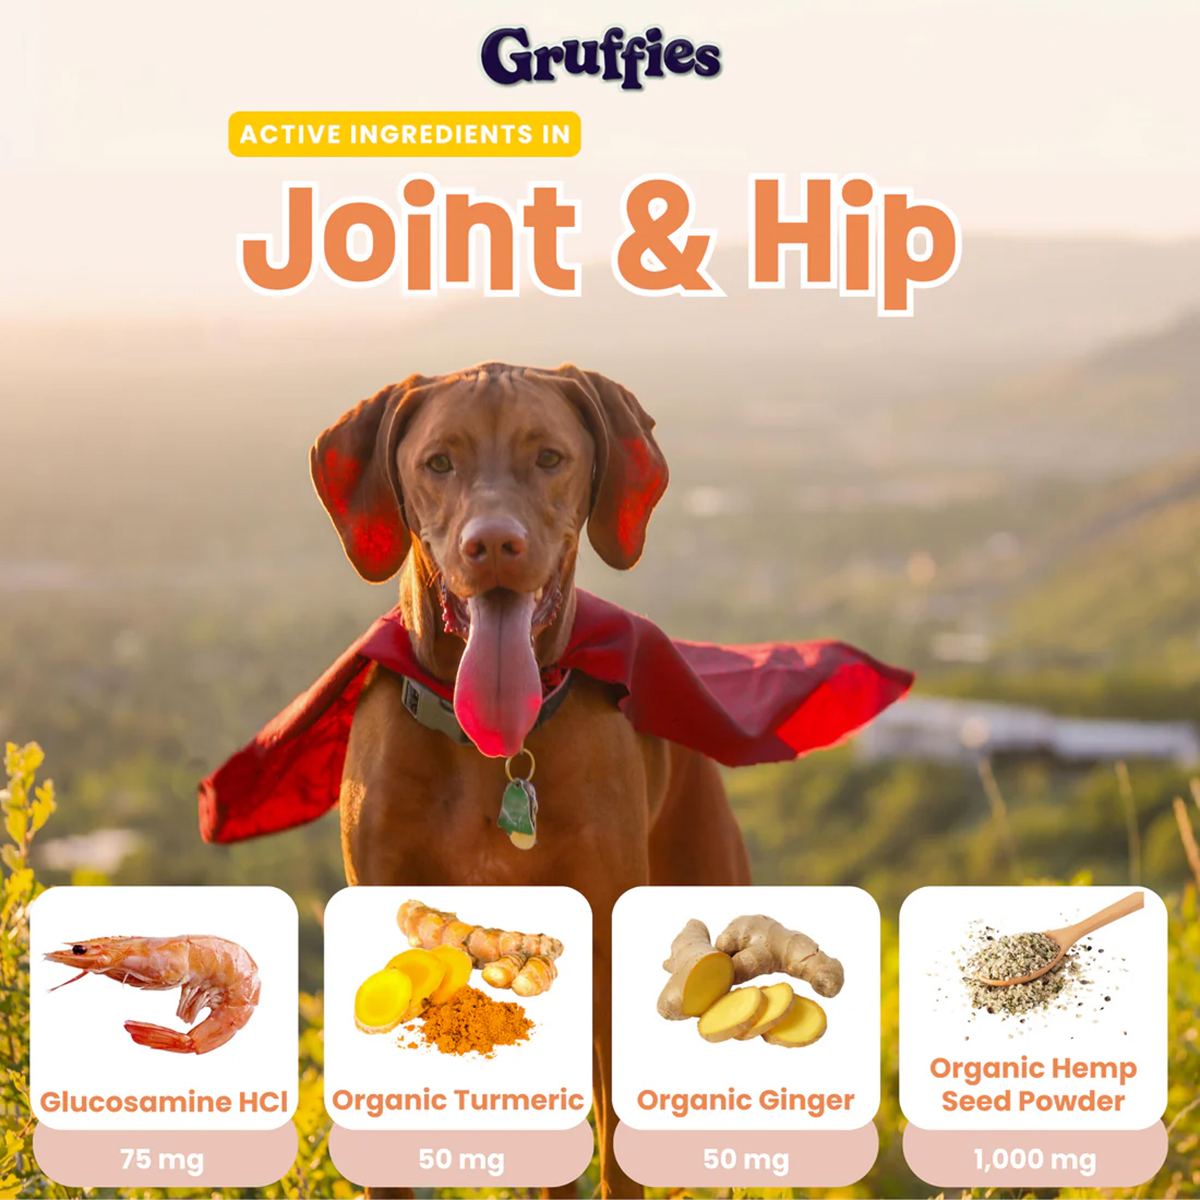 Image Thumbnail for Gruffies - Joint and Hip 6 oz bag (12/CS)